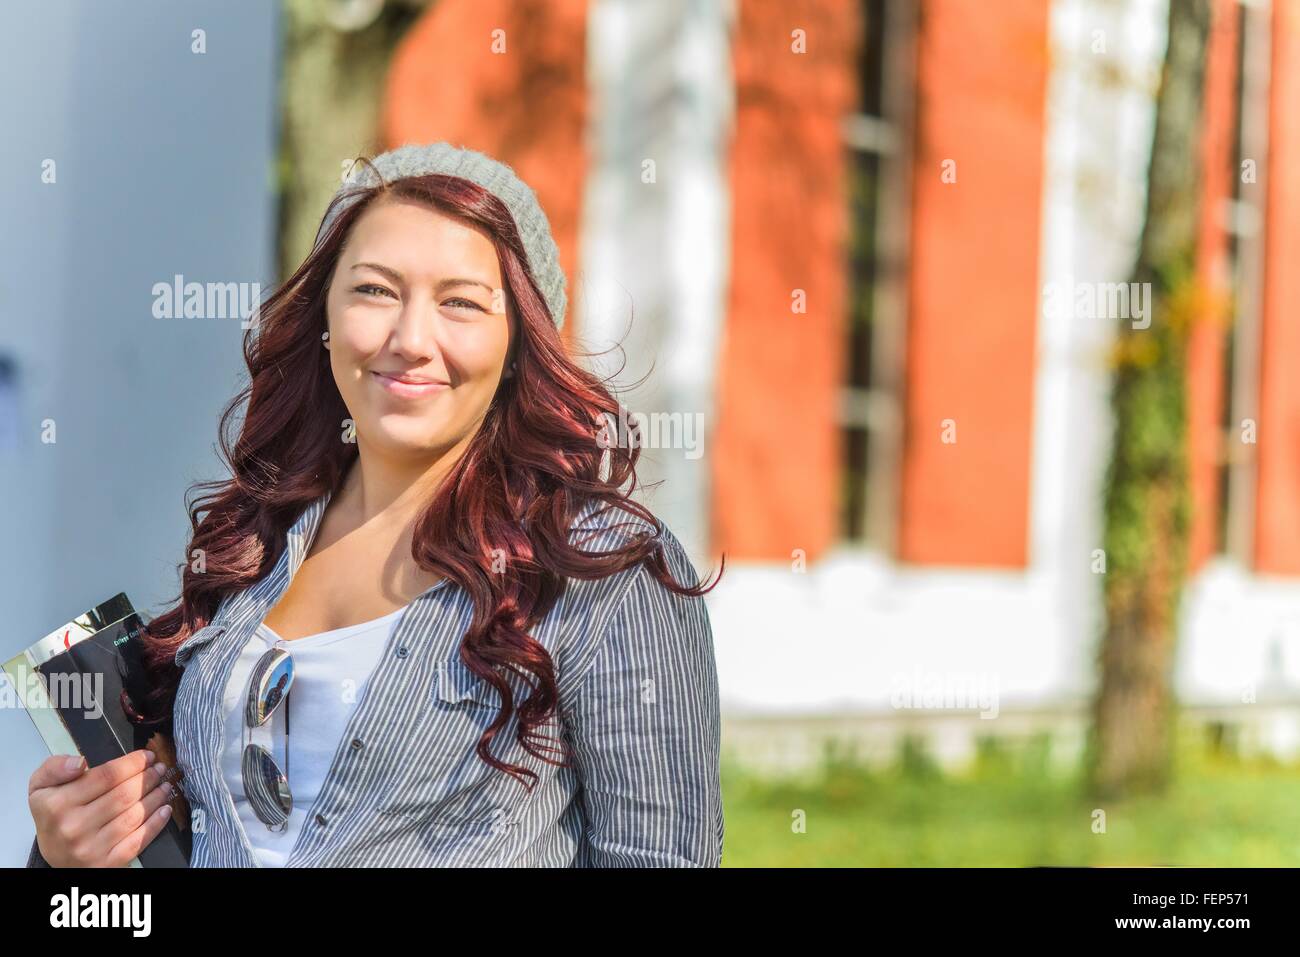 Portrait of adult female college student on campus Stock Photo